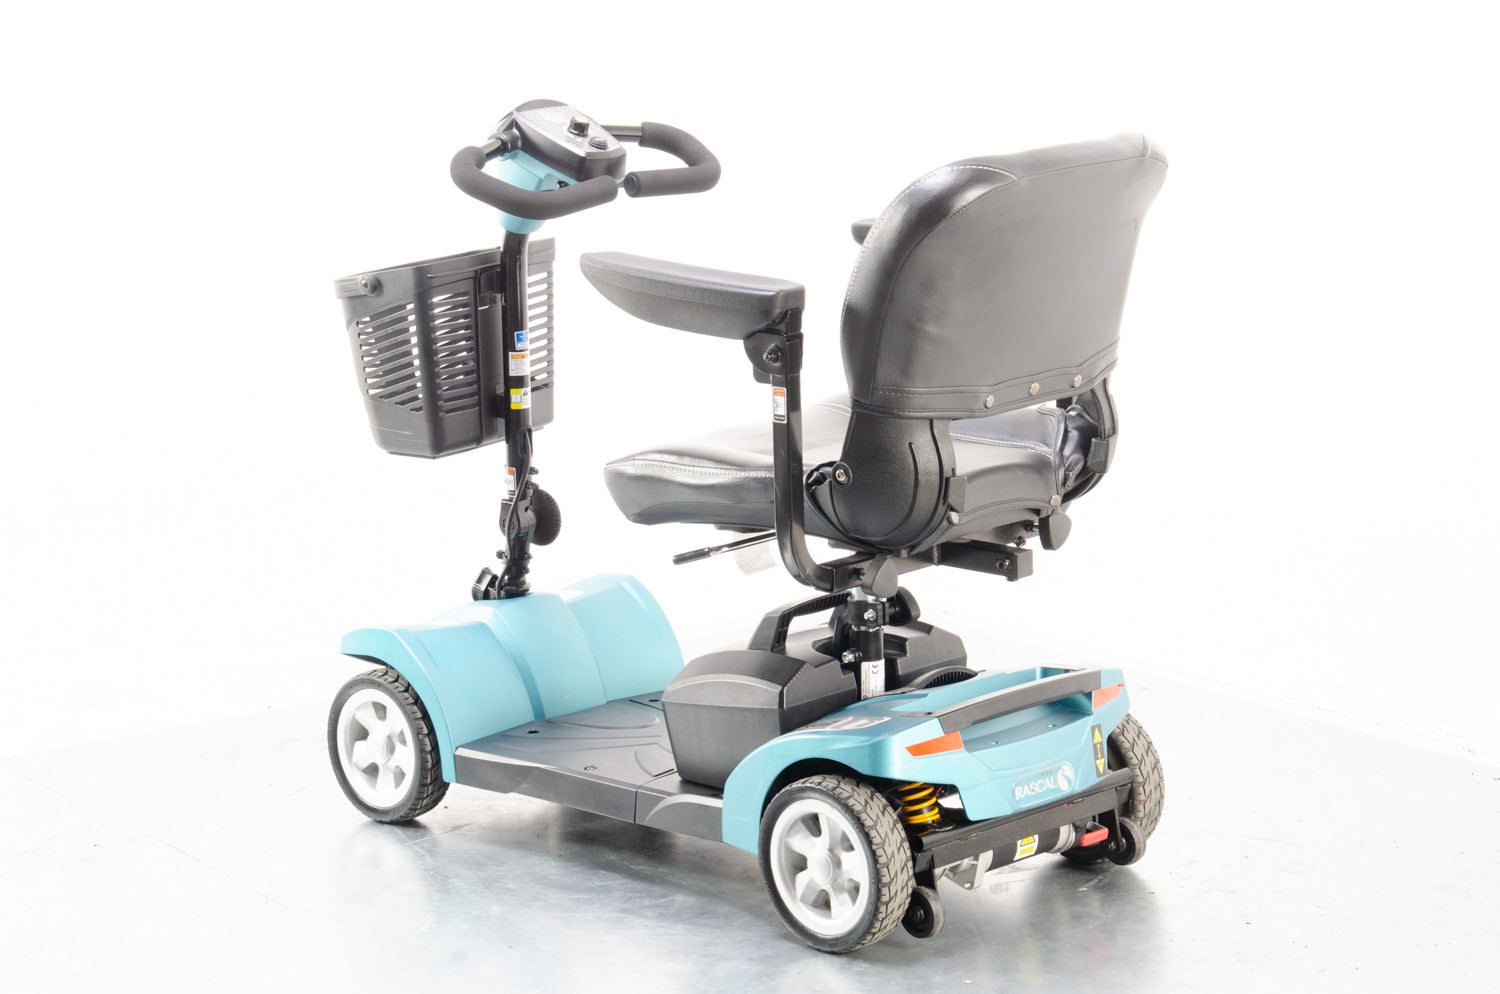 2019 Rascal Veo Sport 4mph Transportable Electric Mobility Boot Scooter with Suspension in Aquamarine